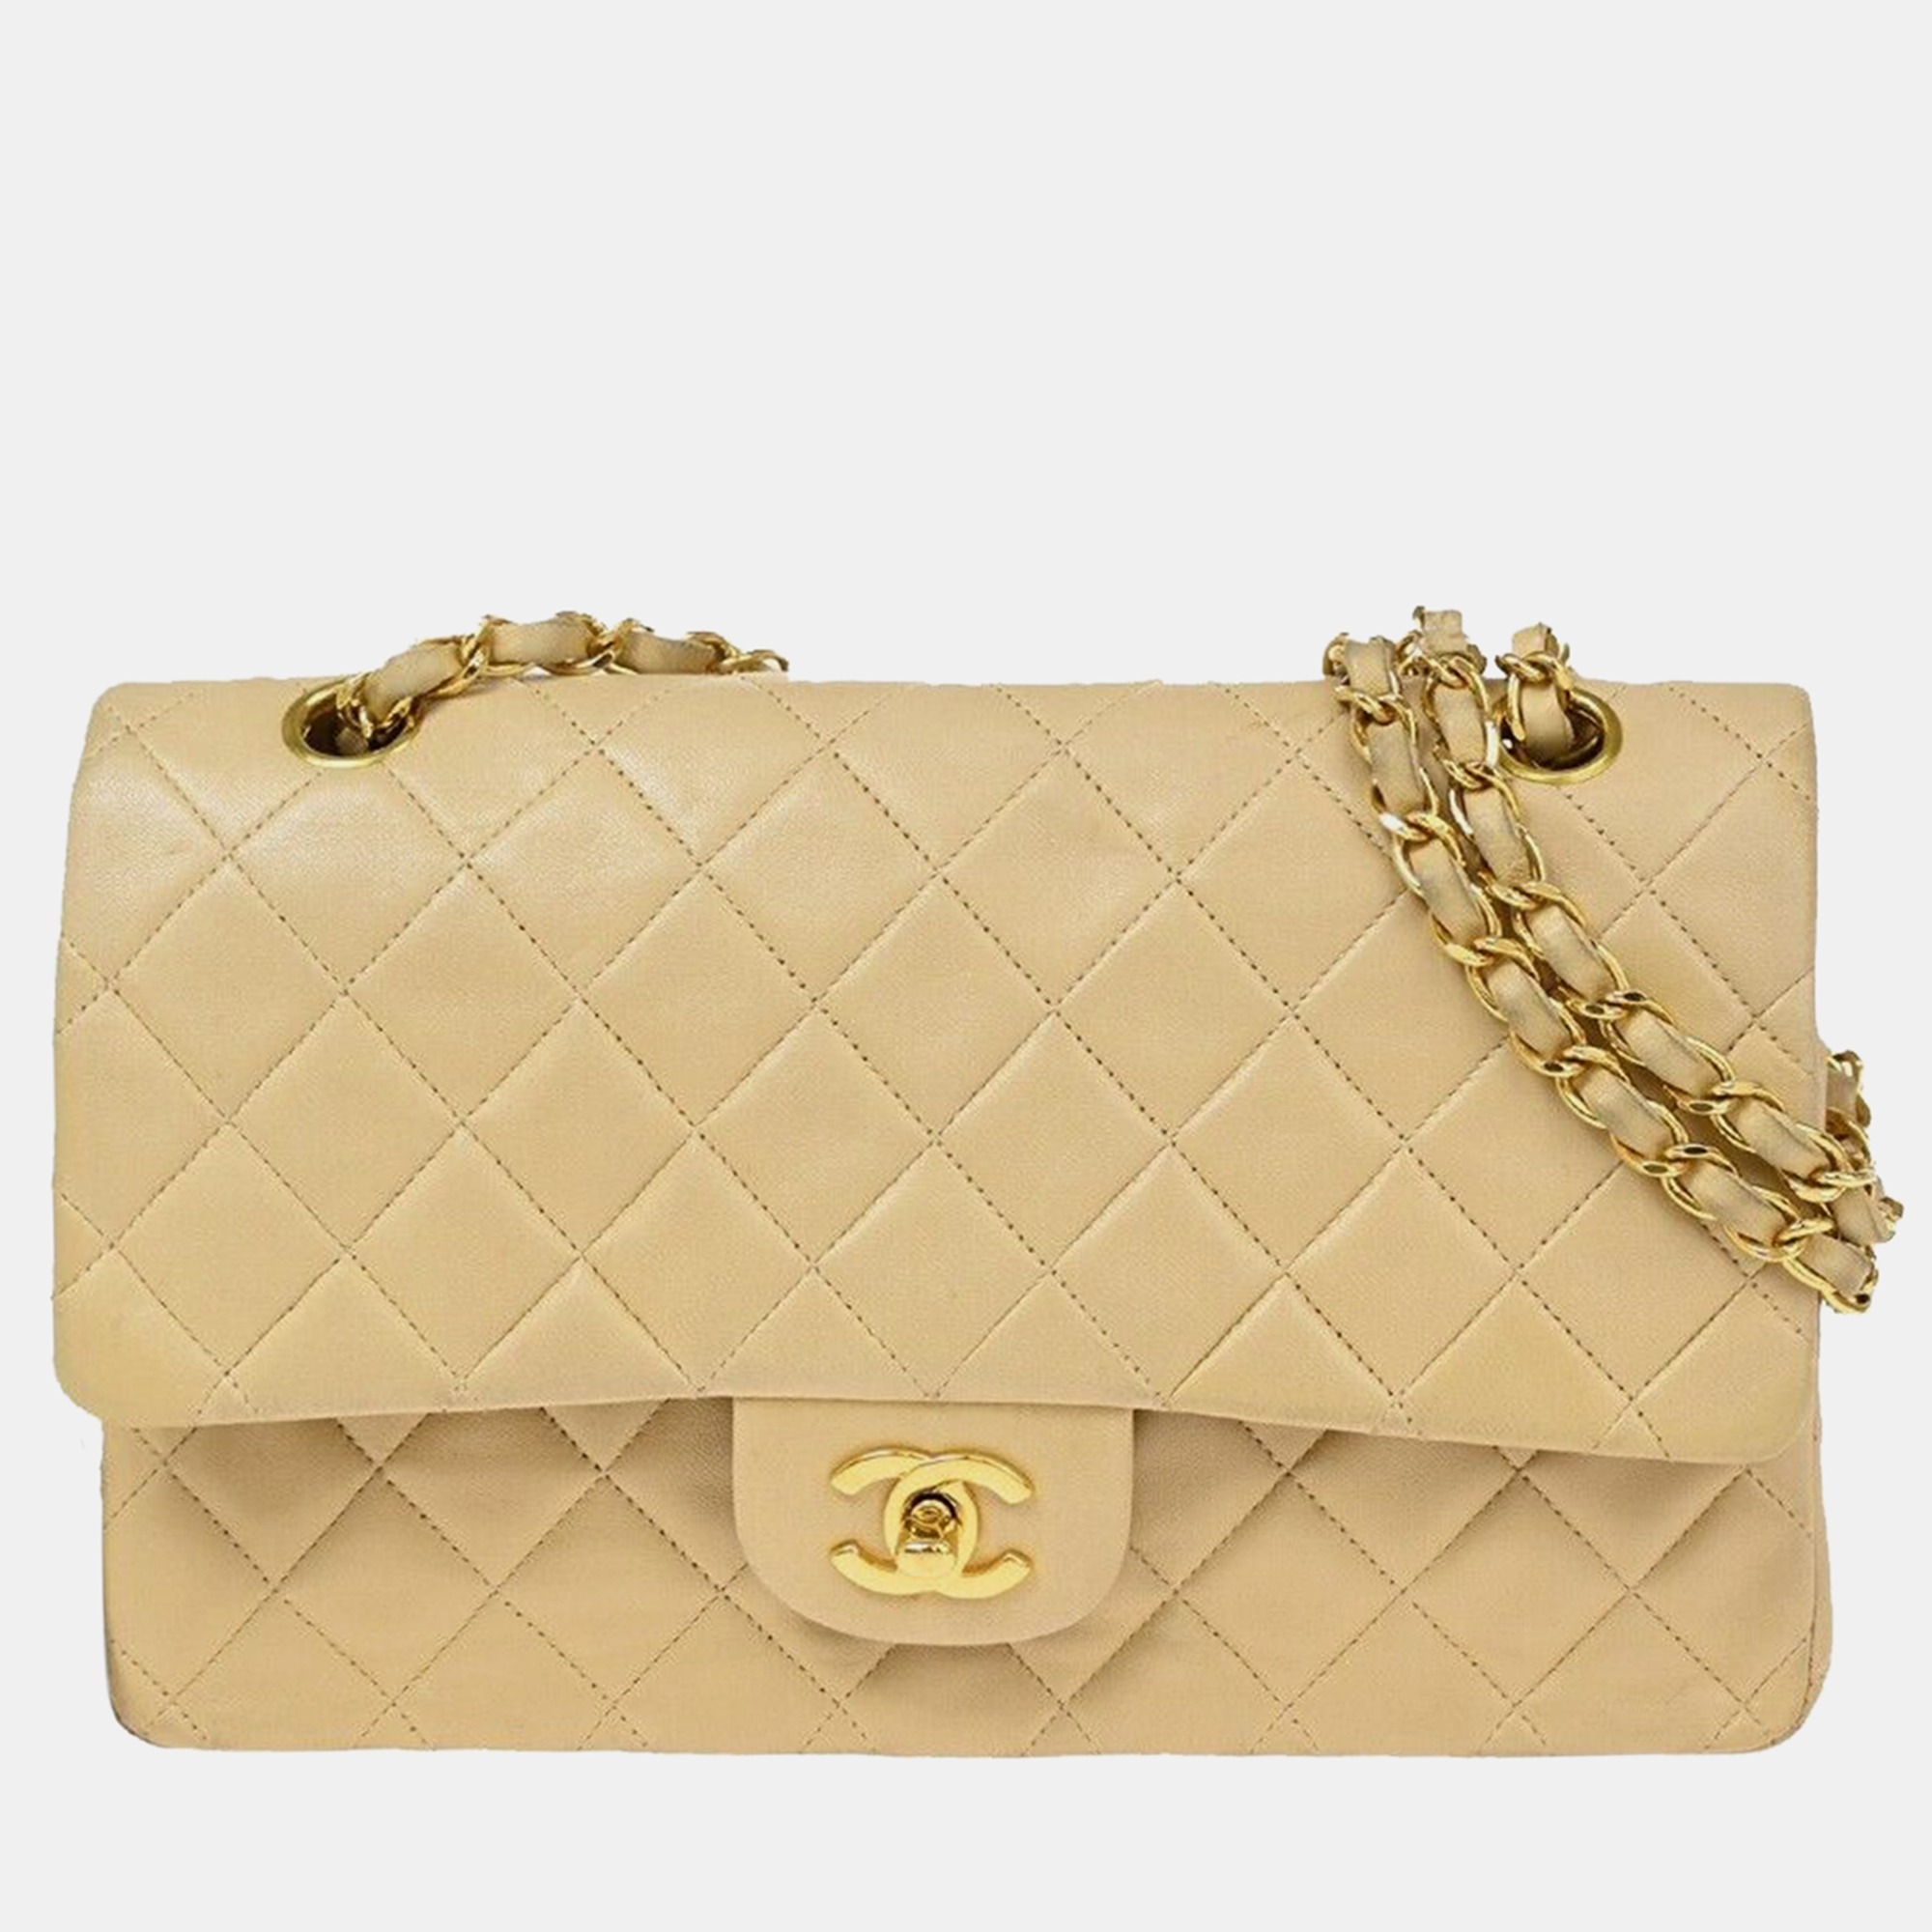 Chanel beige leather classic double flap bag